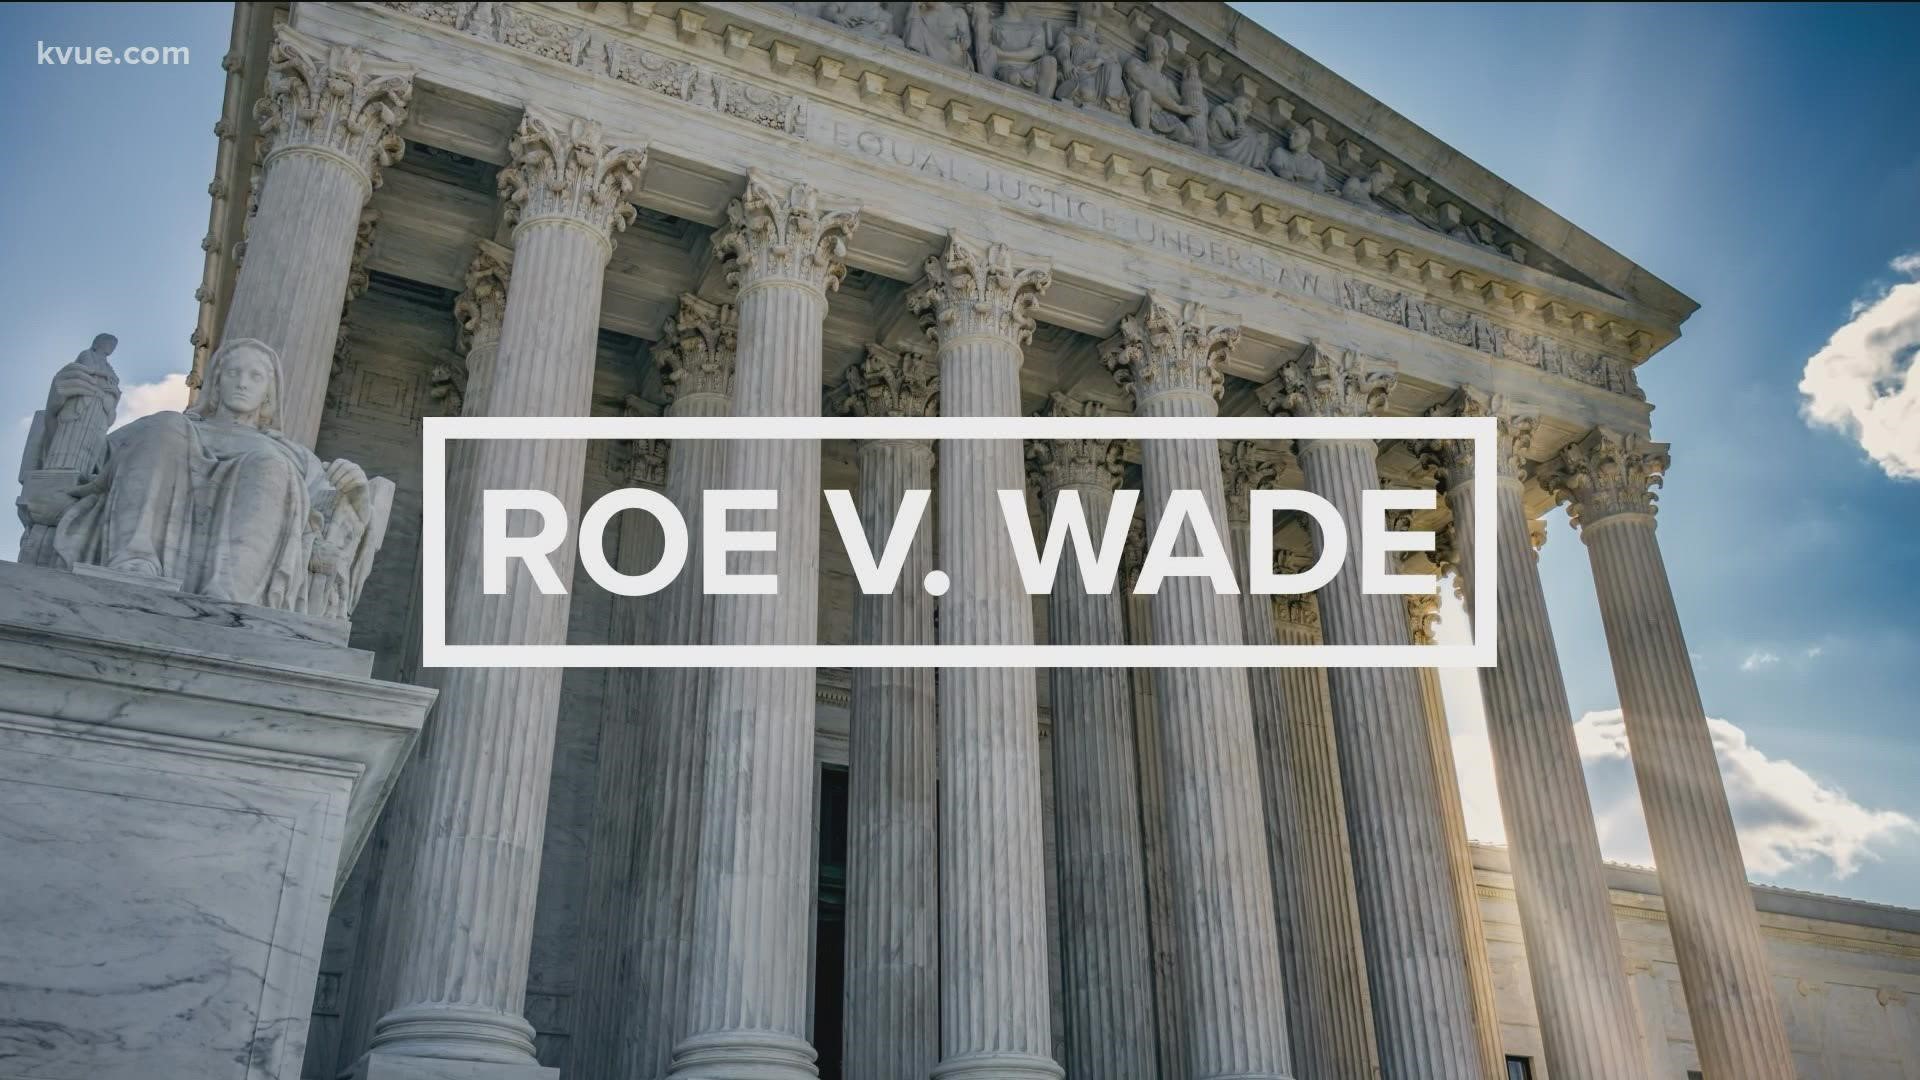 The U.S. Supreme Court is expected to make a ruling on Roe v. Wade before its term ends in late June or early July. The City of Austin wants to be prepared.